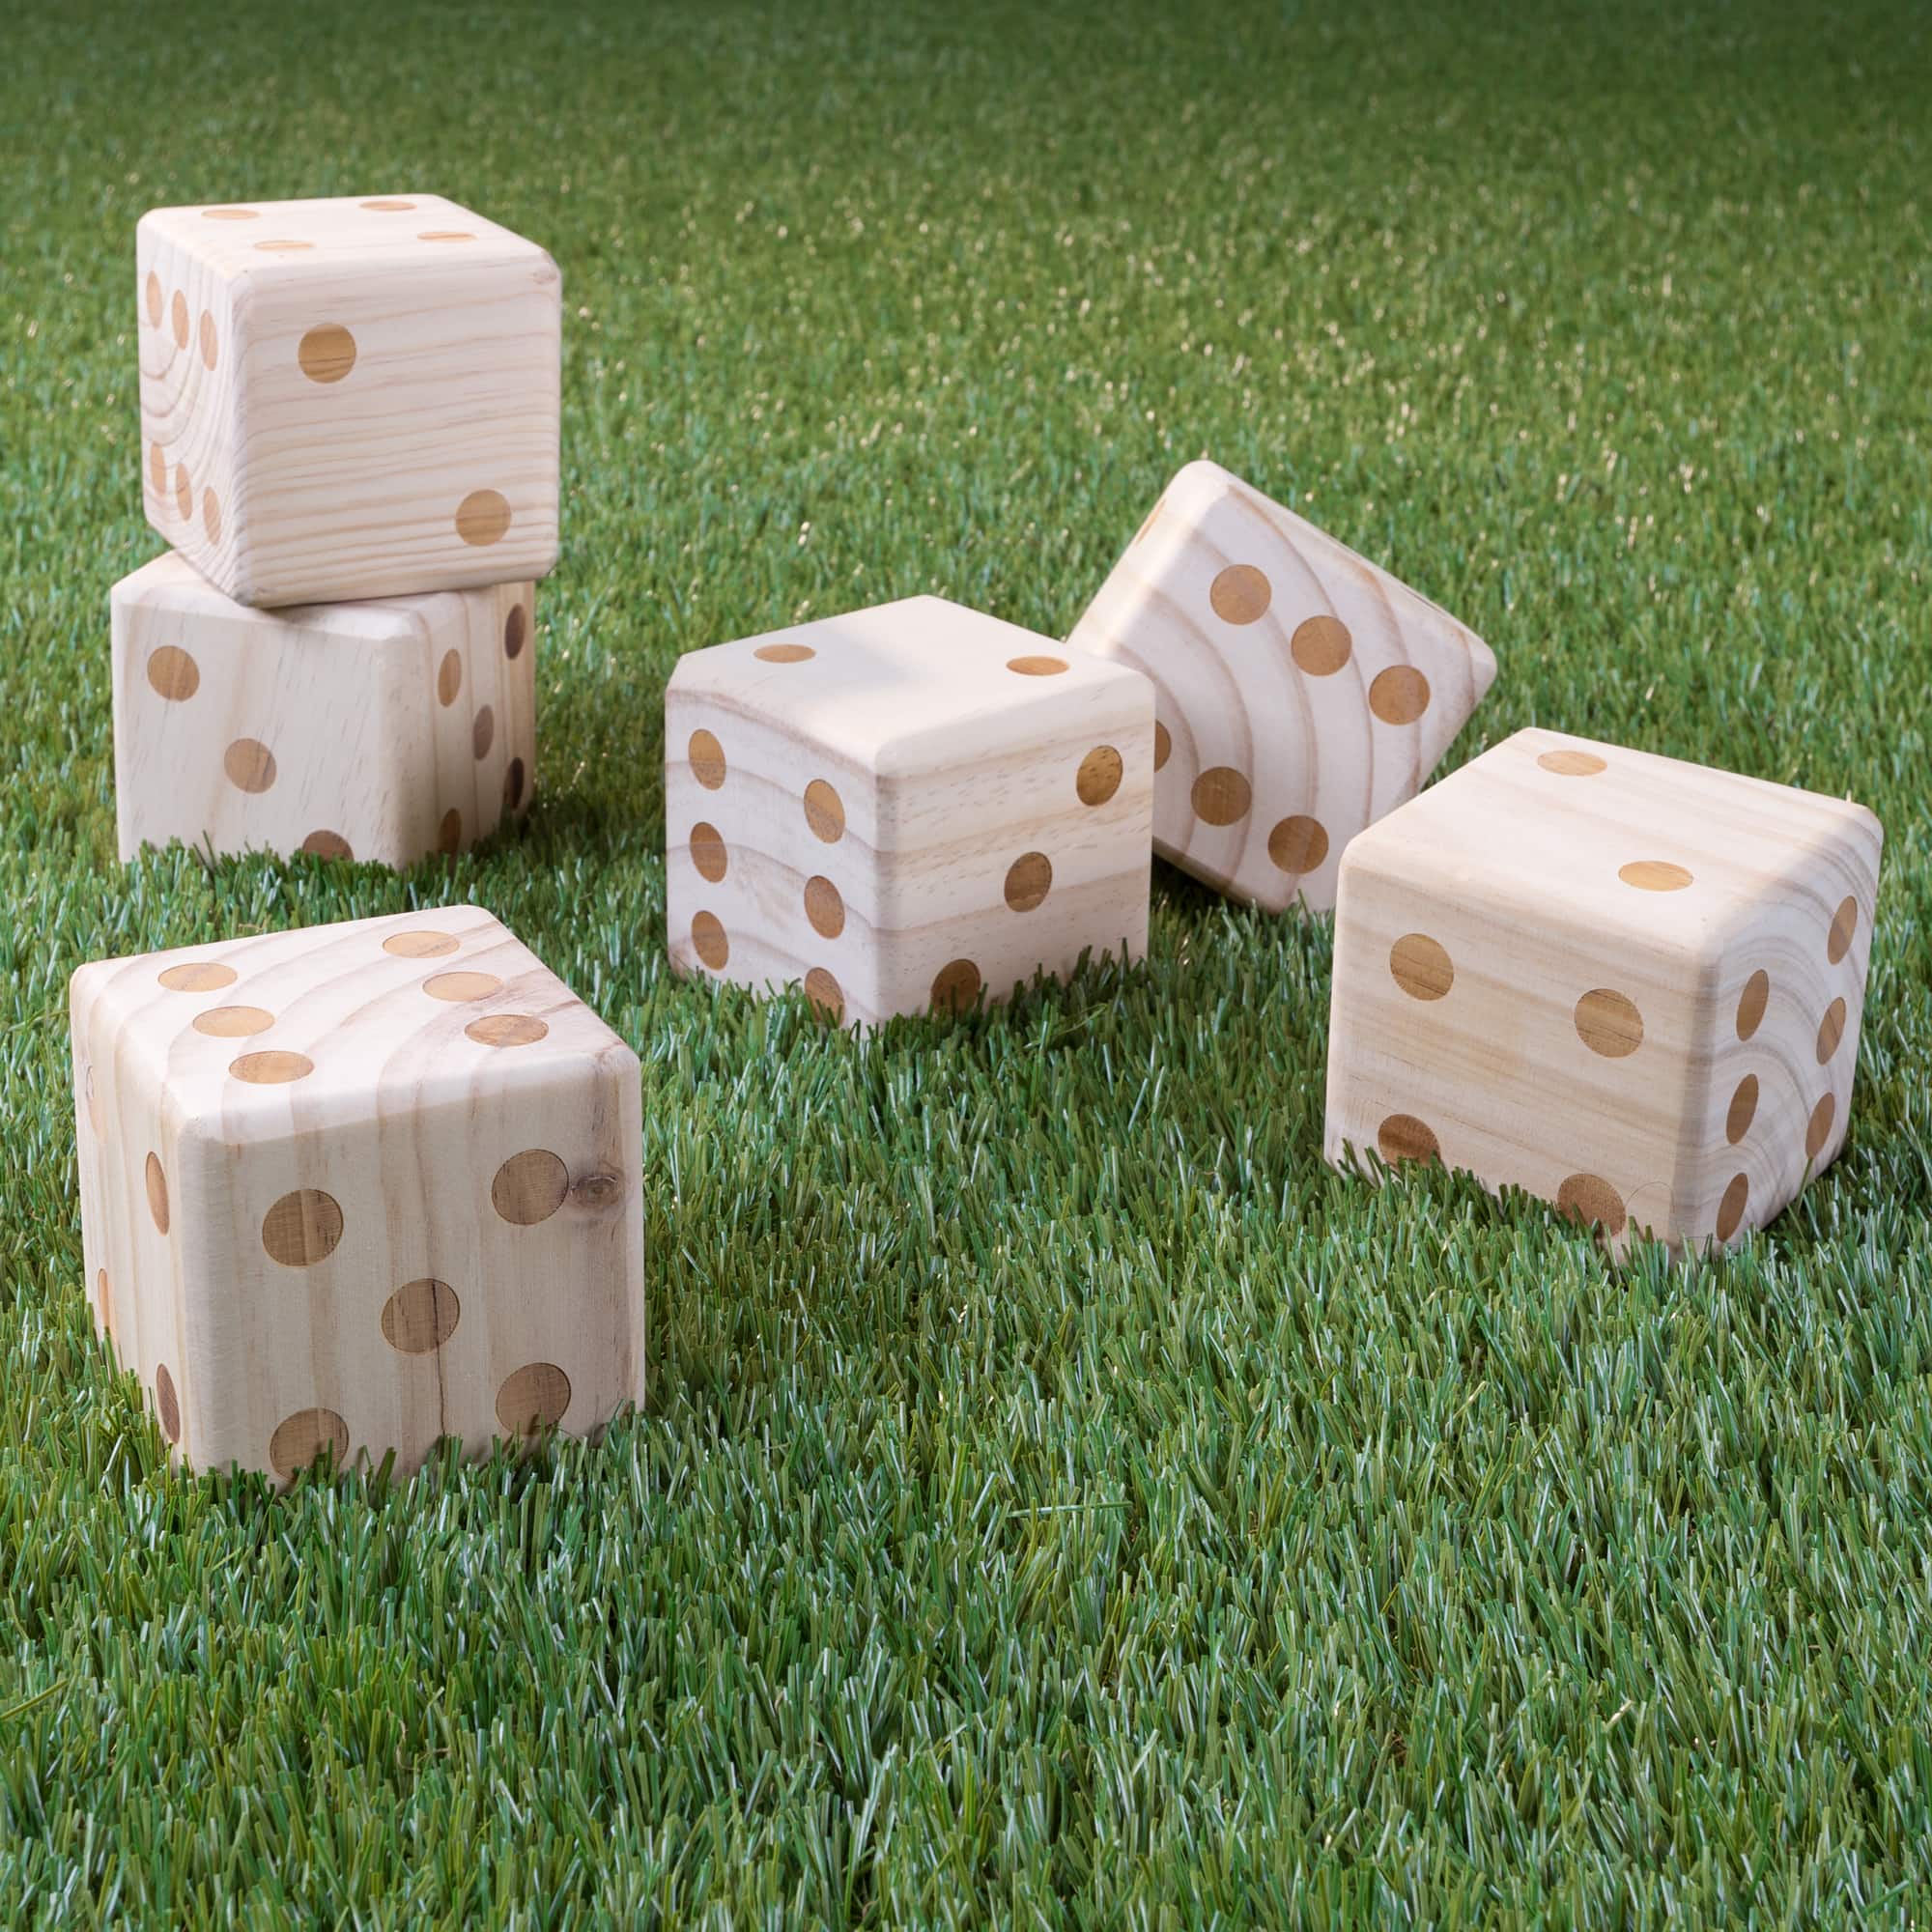 Toy Time Giant Wooden Yard Dice Game